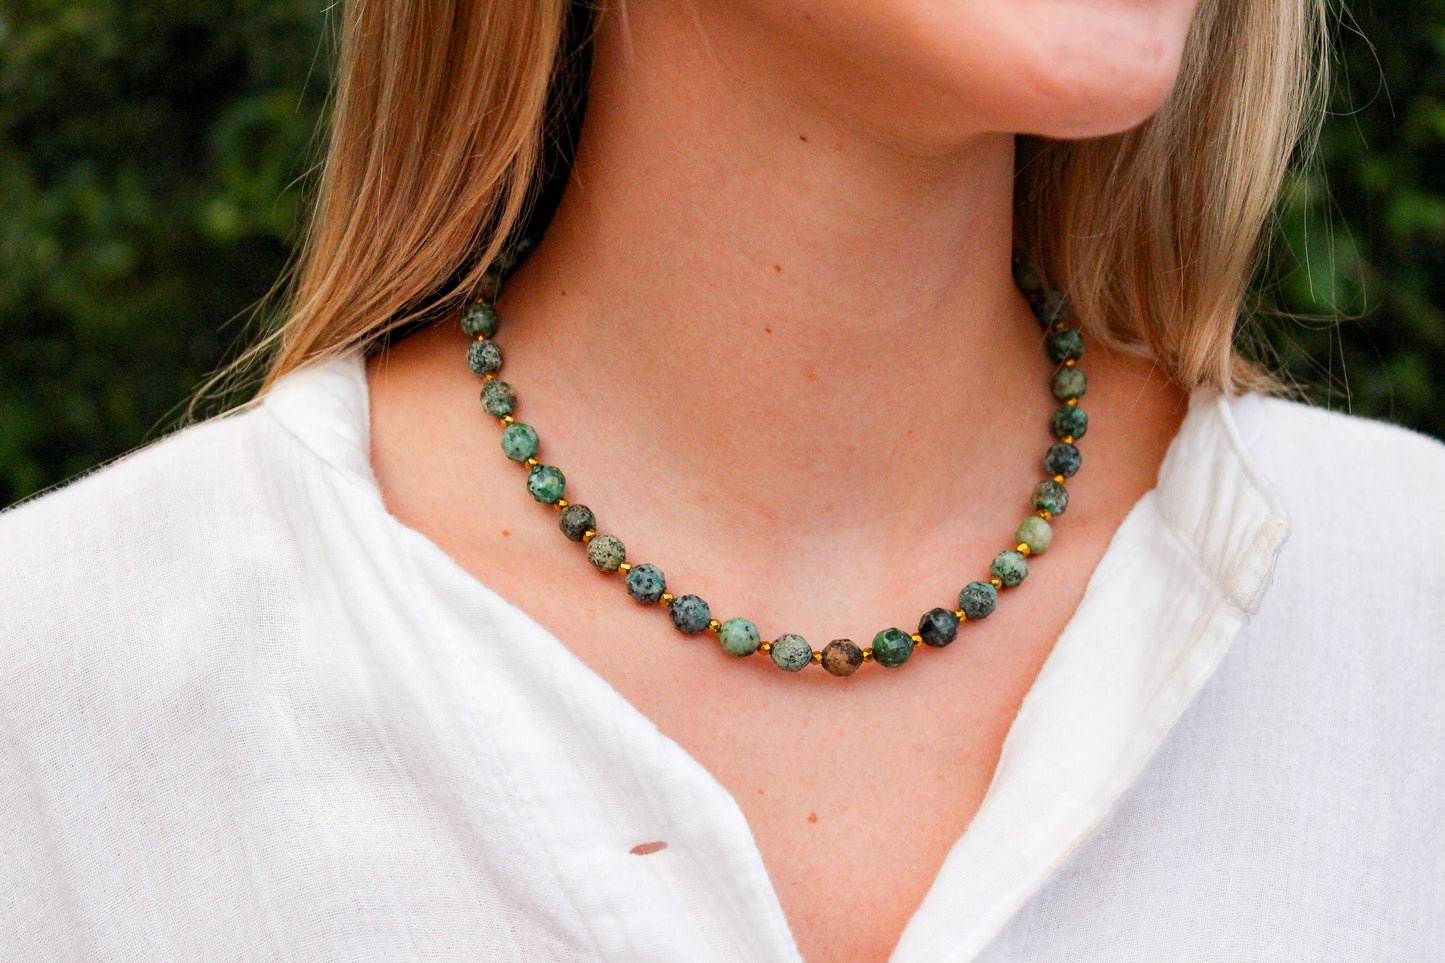 8mm Shades of Green Rock Bead Necklace